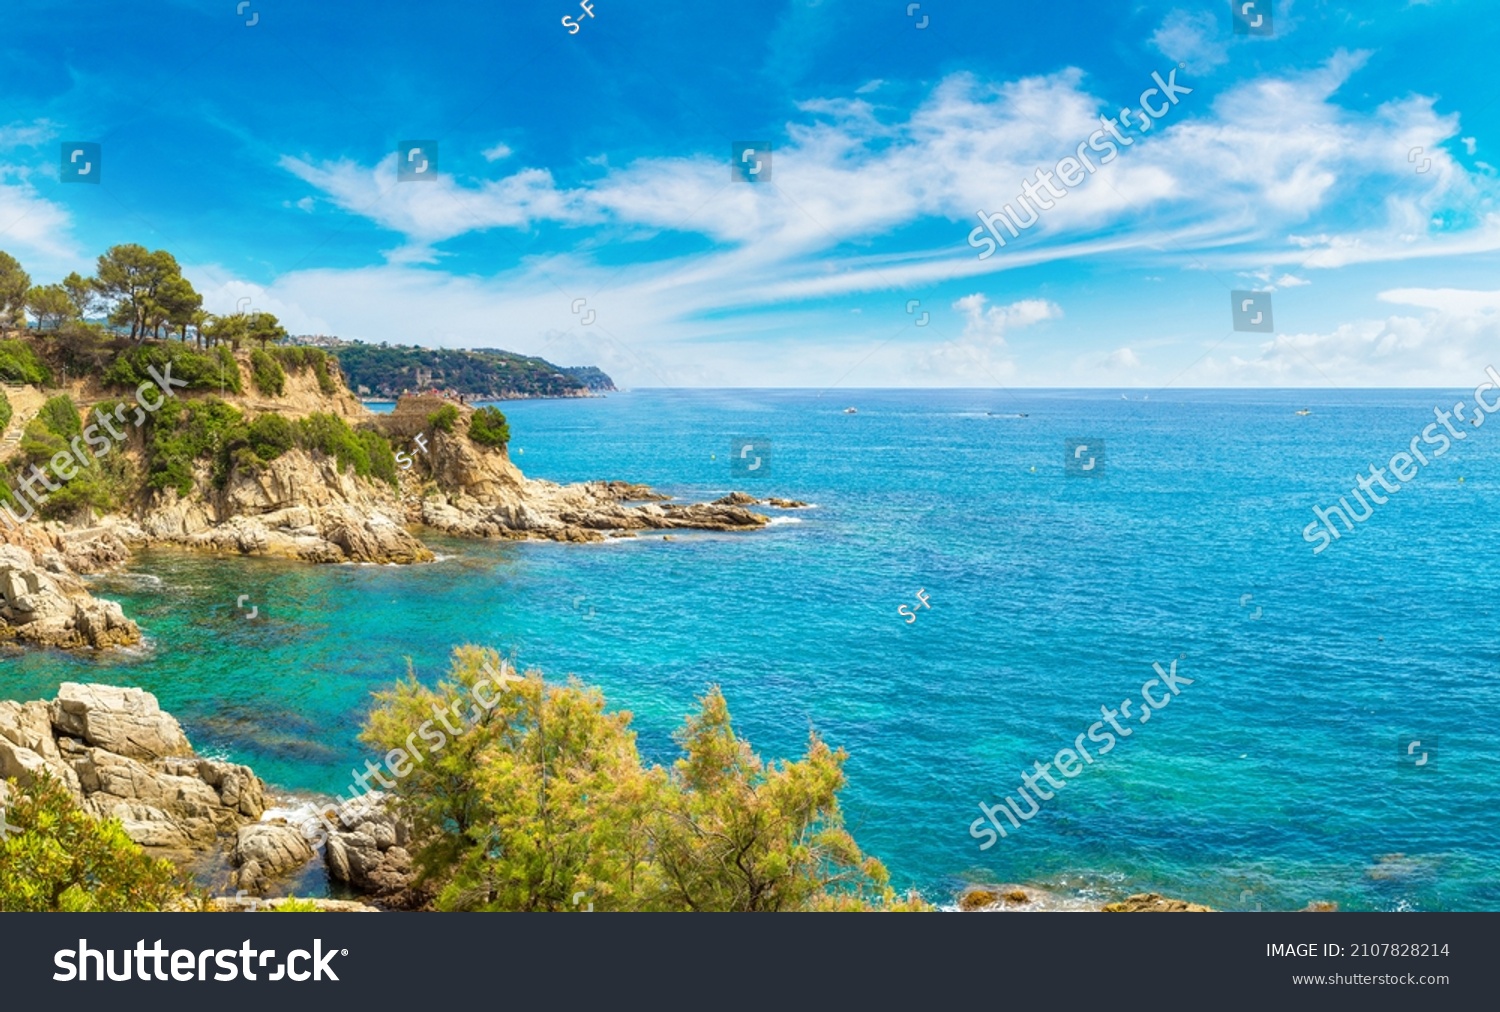 Panorama of Rocks on the coast of Lloret de Mar in a beautiful summer day, Costa Brava, 

Catalonia, Spain #2107828214